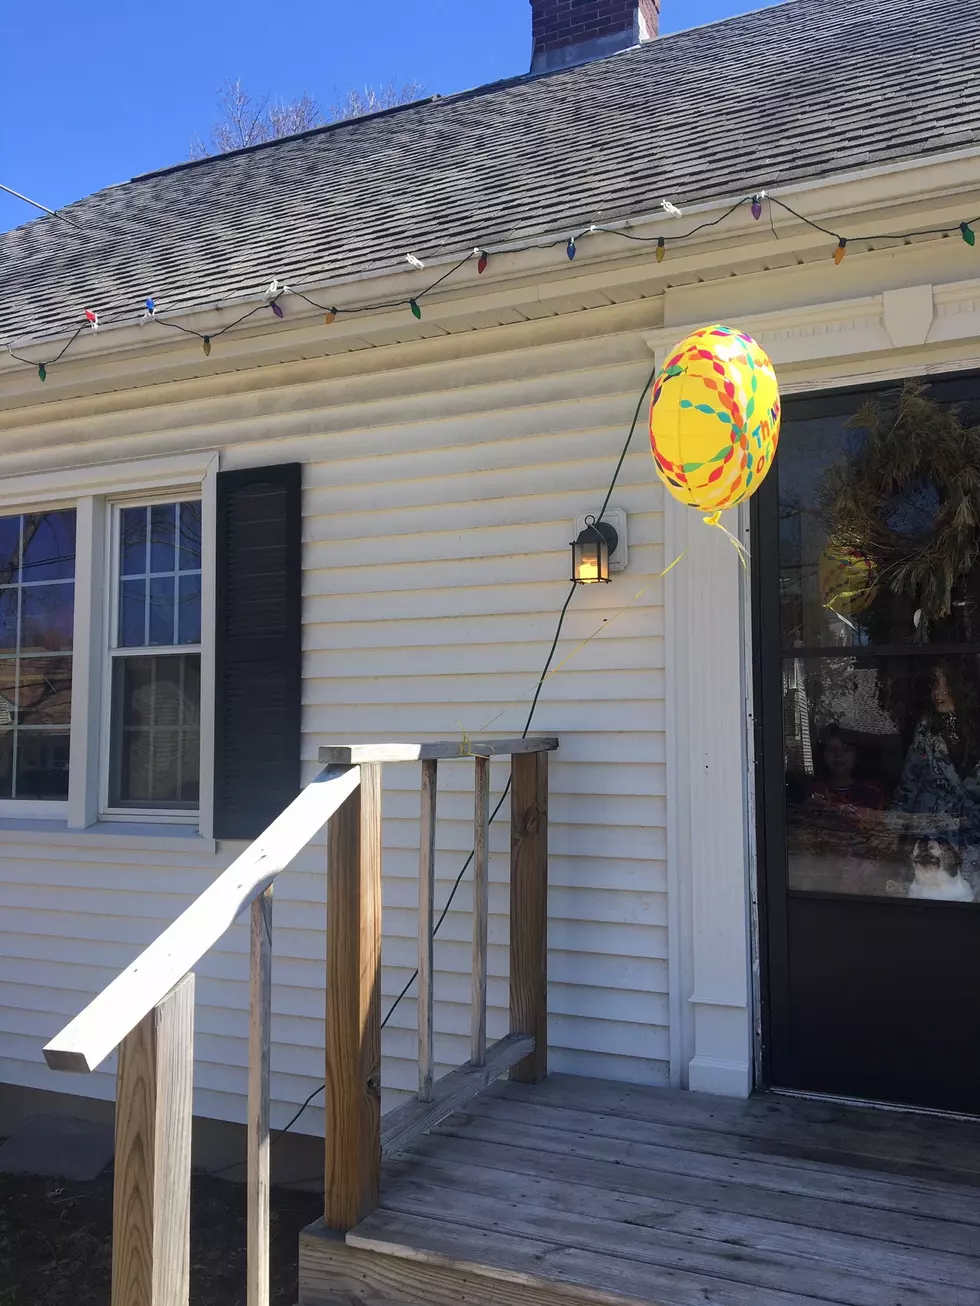 Local Florist Brightening Day With Balloons